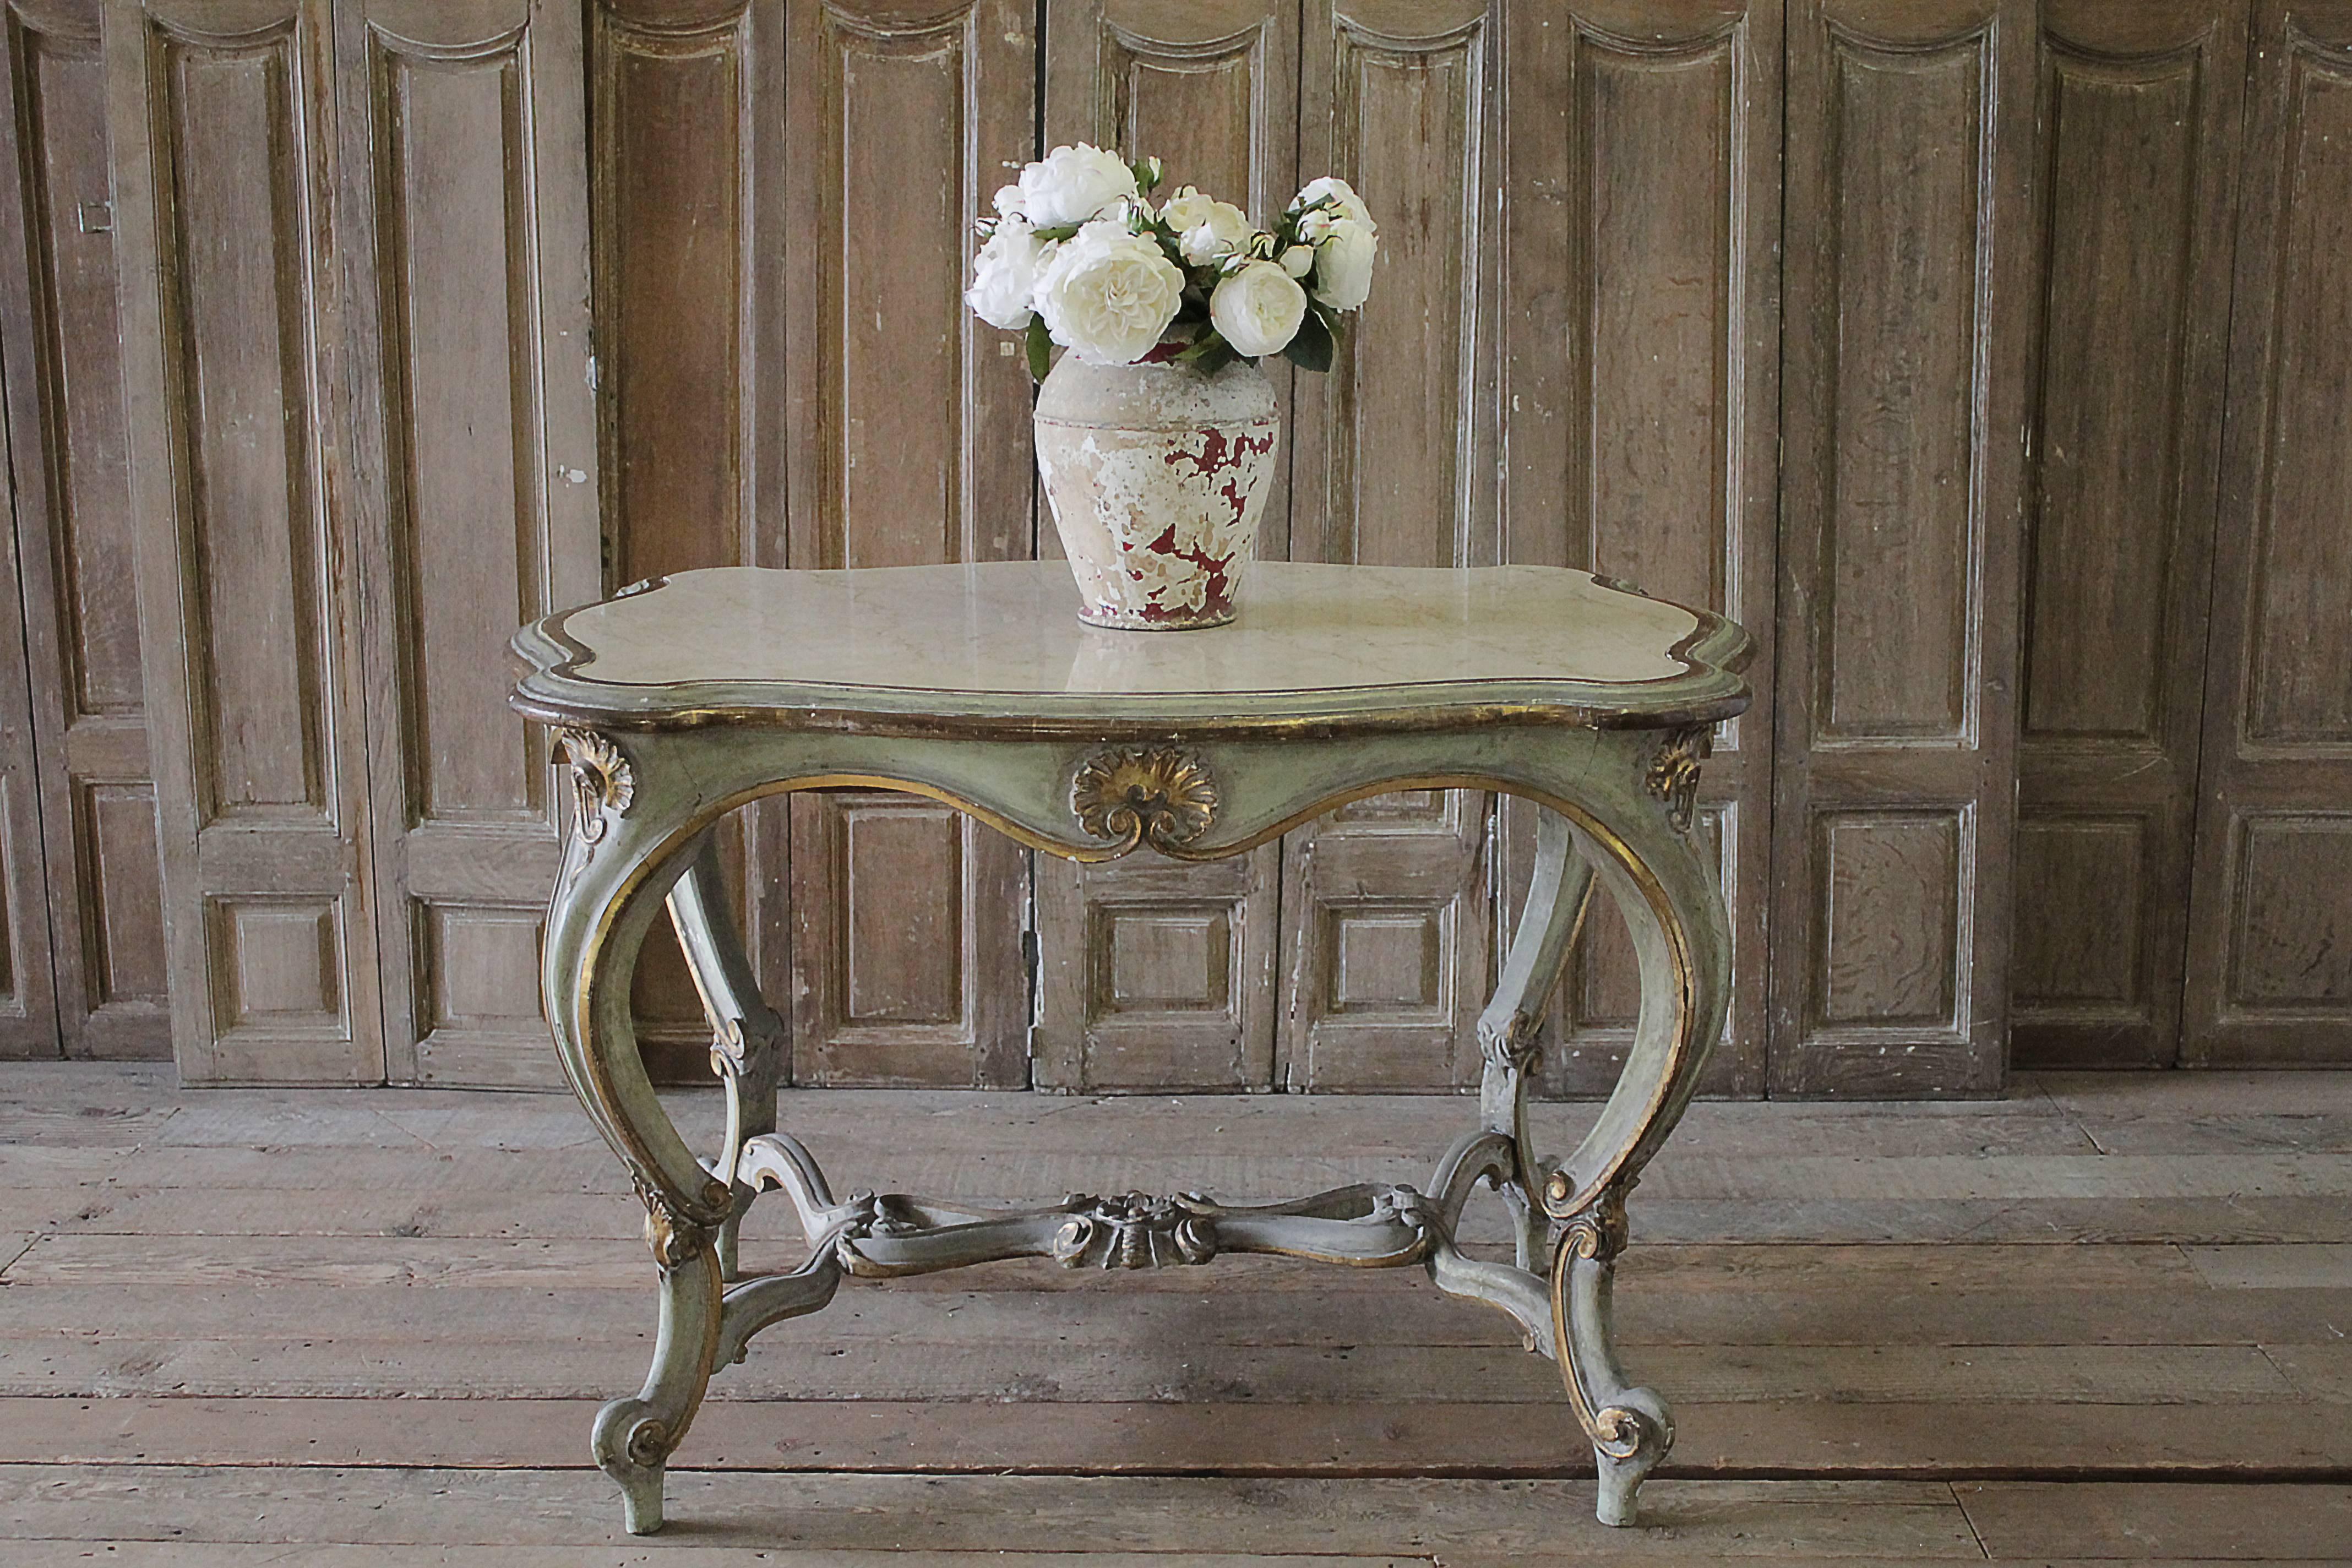 Lovely antique French Louis XV carved and painted center table with marble inset top. Original painted finish in soft greenish-grey with gilt accents. Marble top is a cream color with taupe colored veins. Signs of use, scratches present. Marble